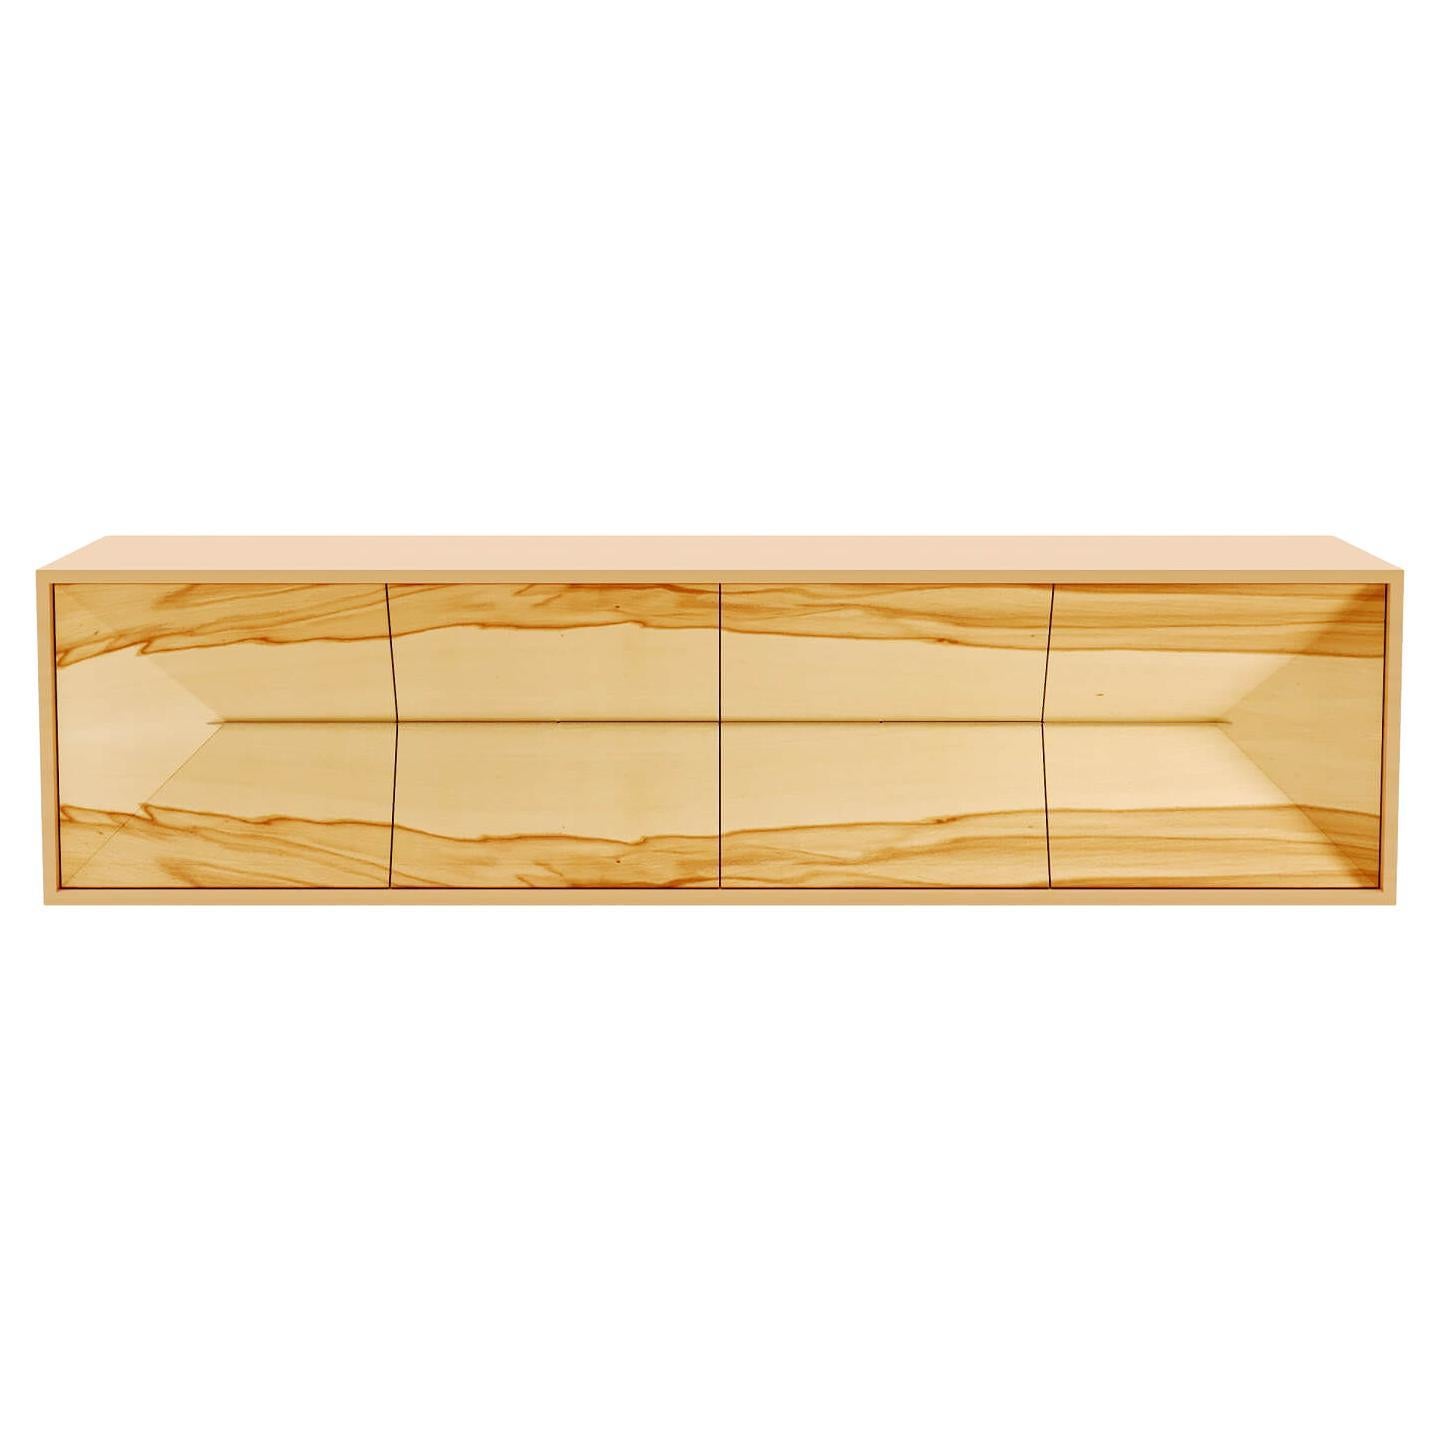 21st Century Modern Credenza Sideboard Convex in Wood and Stainless Steel